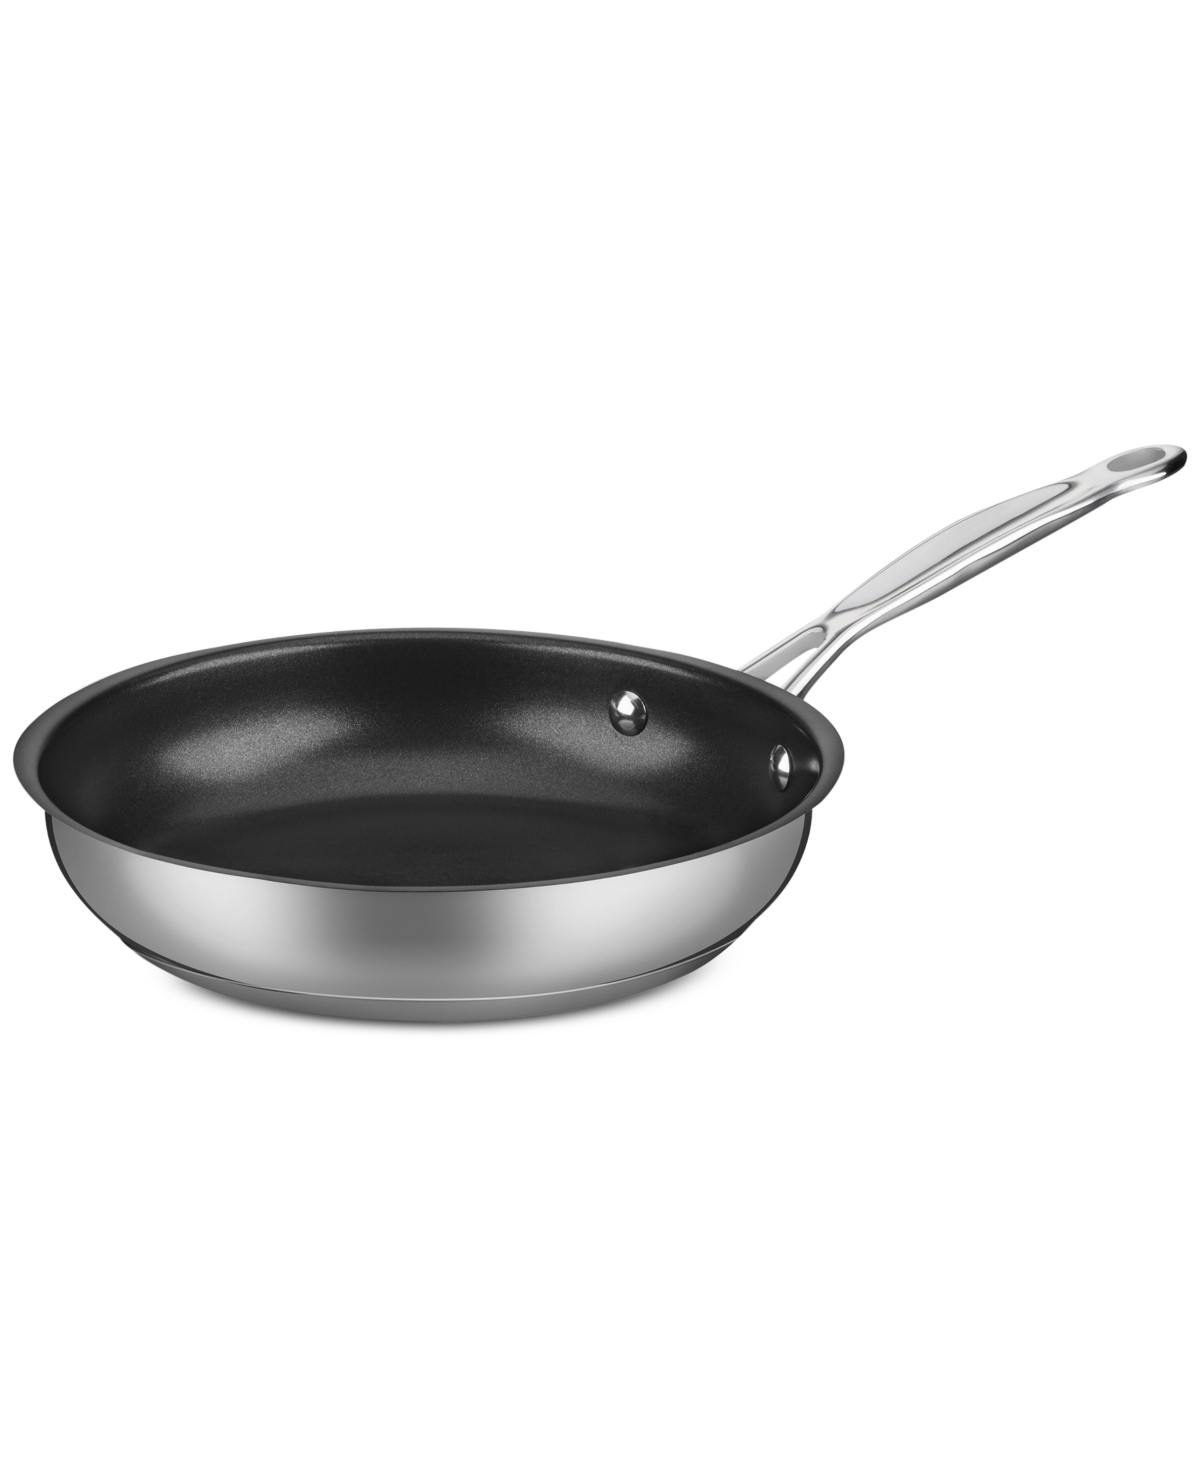 Cuisinart Chef's Classic Stainless Steel 10" Nonstick Skillet